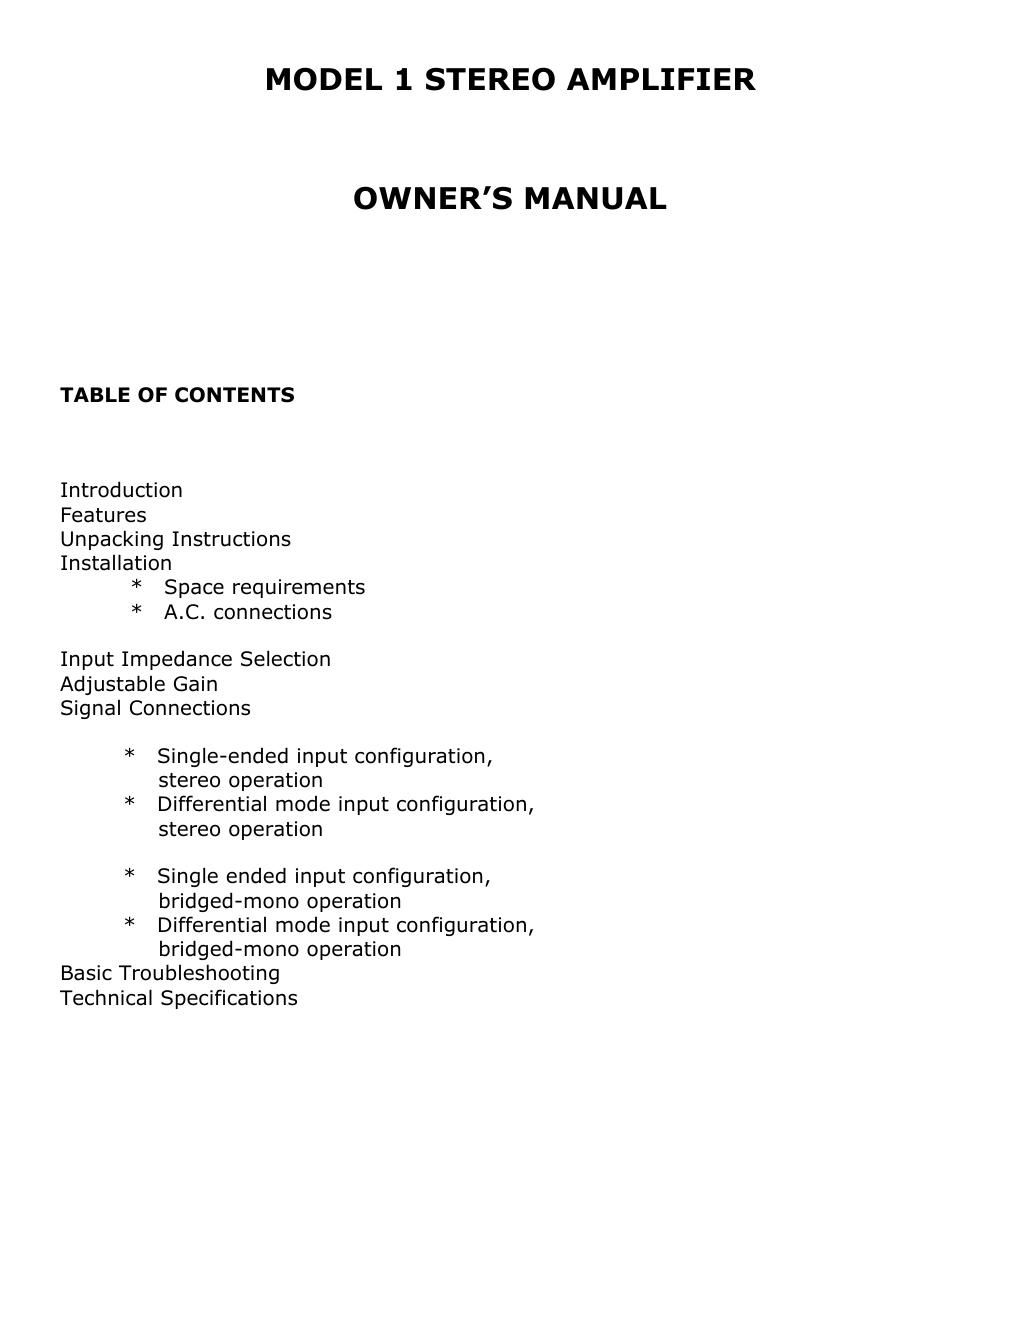 jeff rowland m 1 owners manual